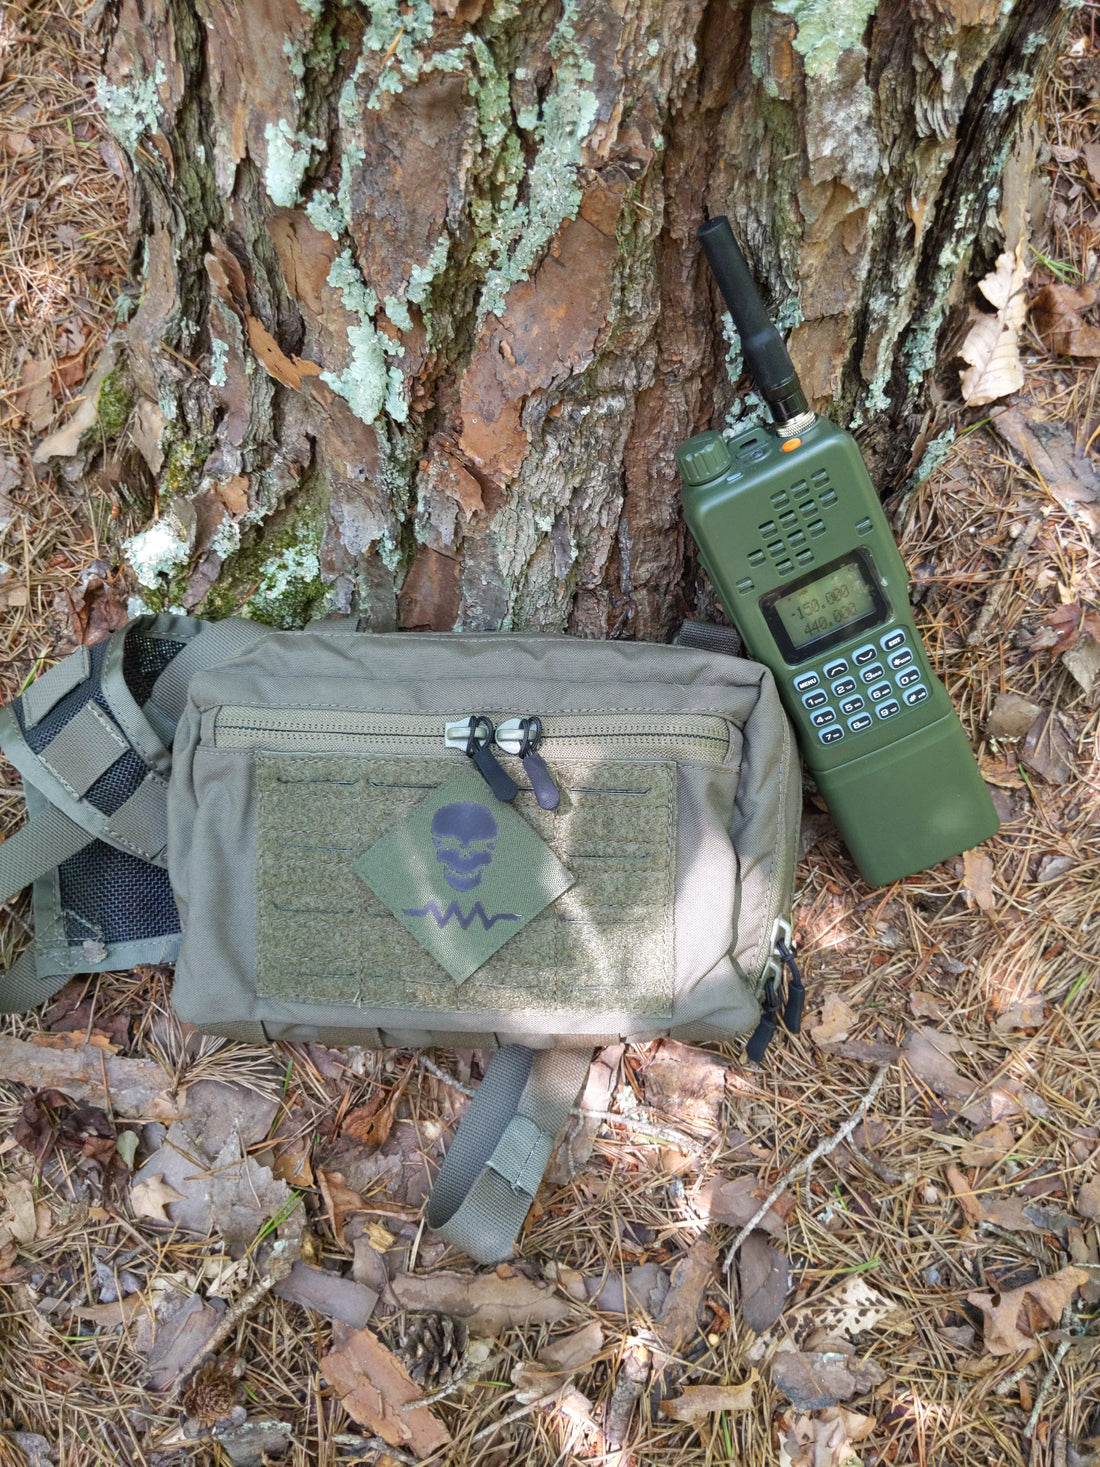 Low Profile Chest Rigs...An EDC Option